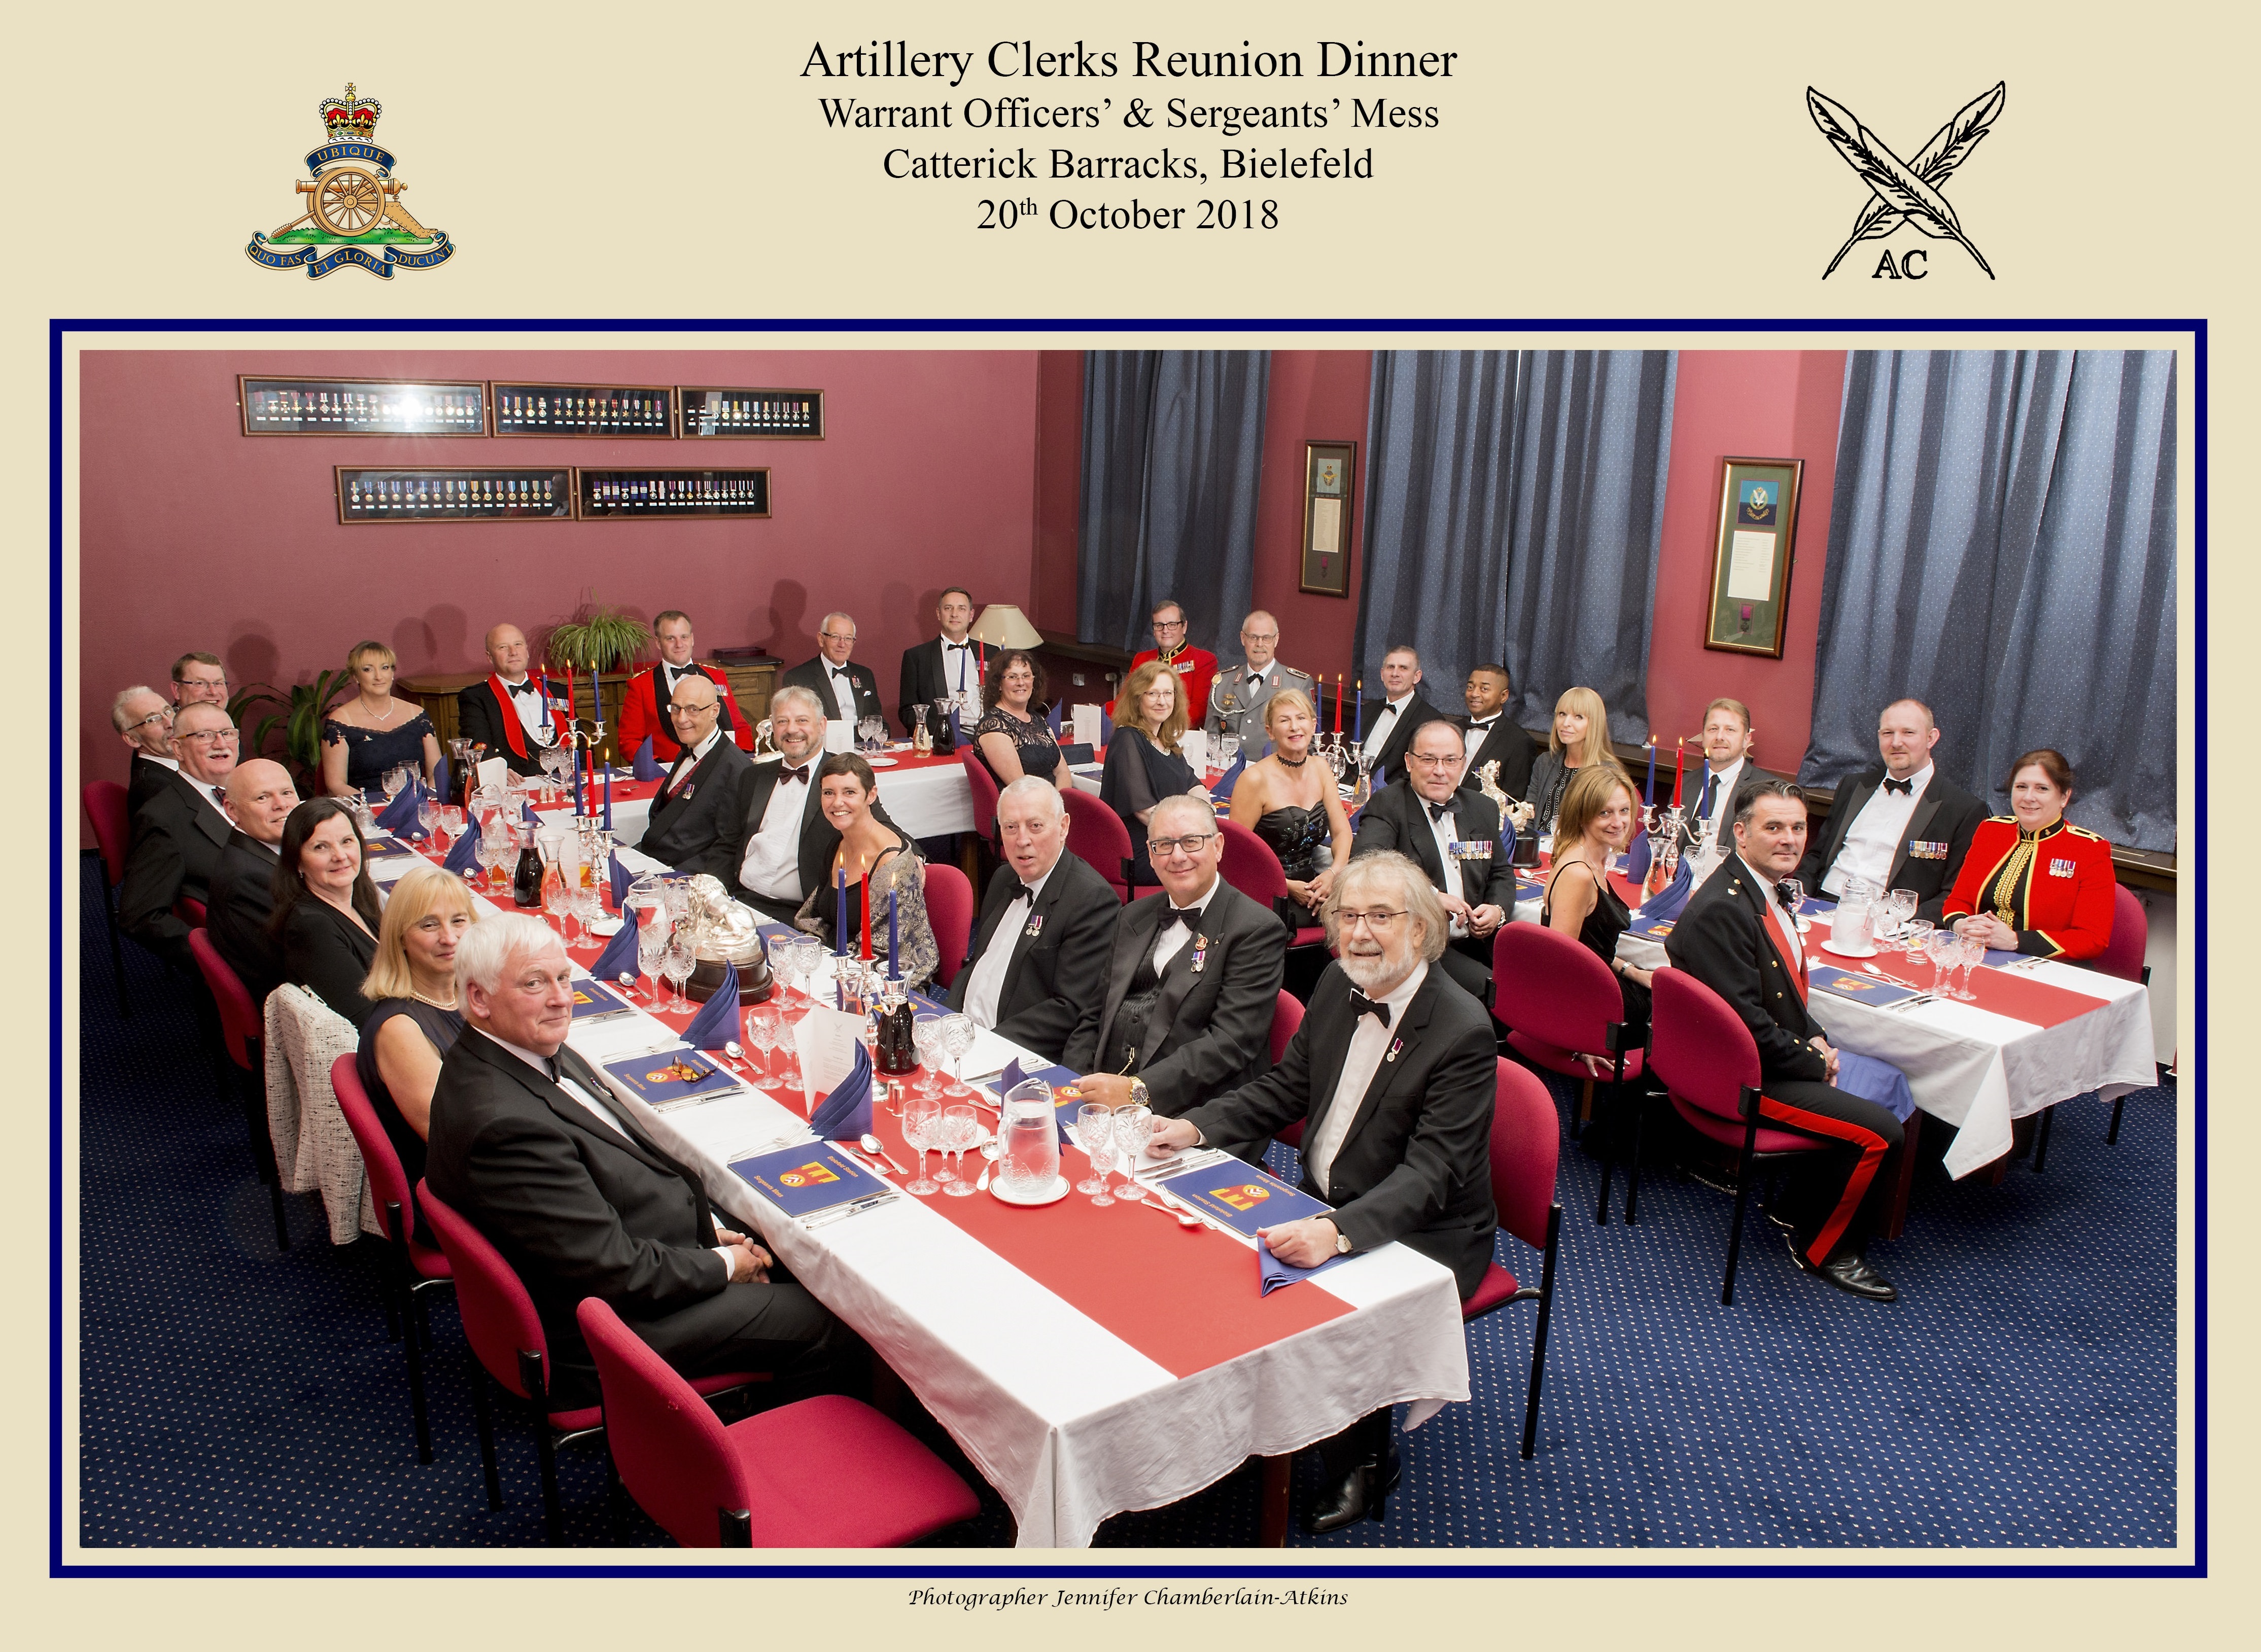 2018 Germany Reunion Dinner group photograph